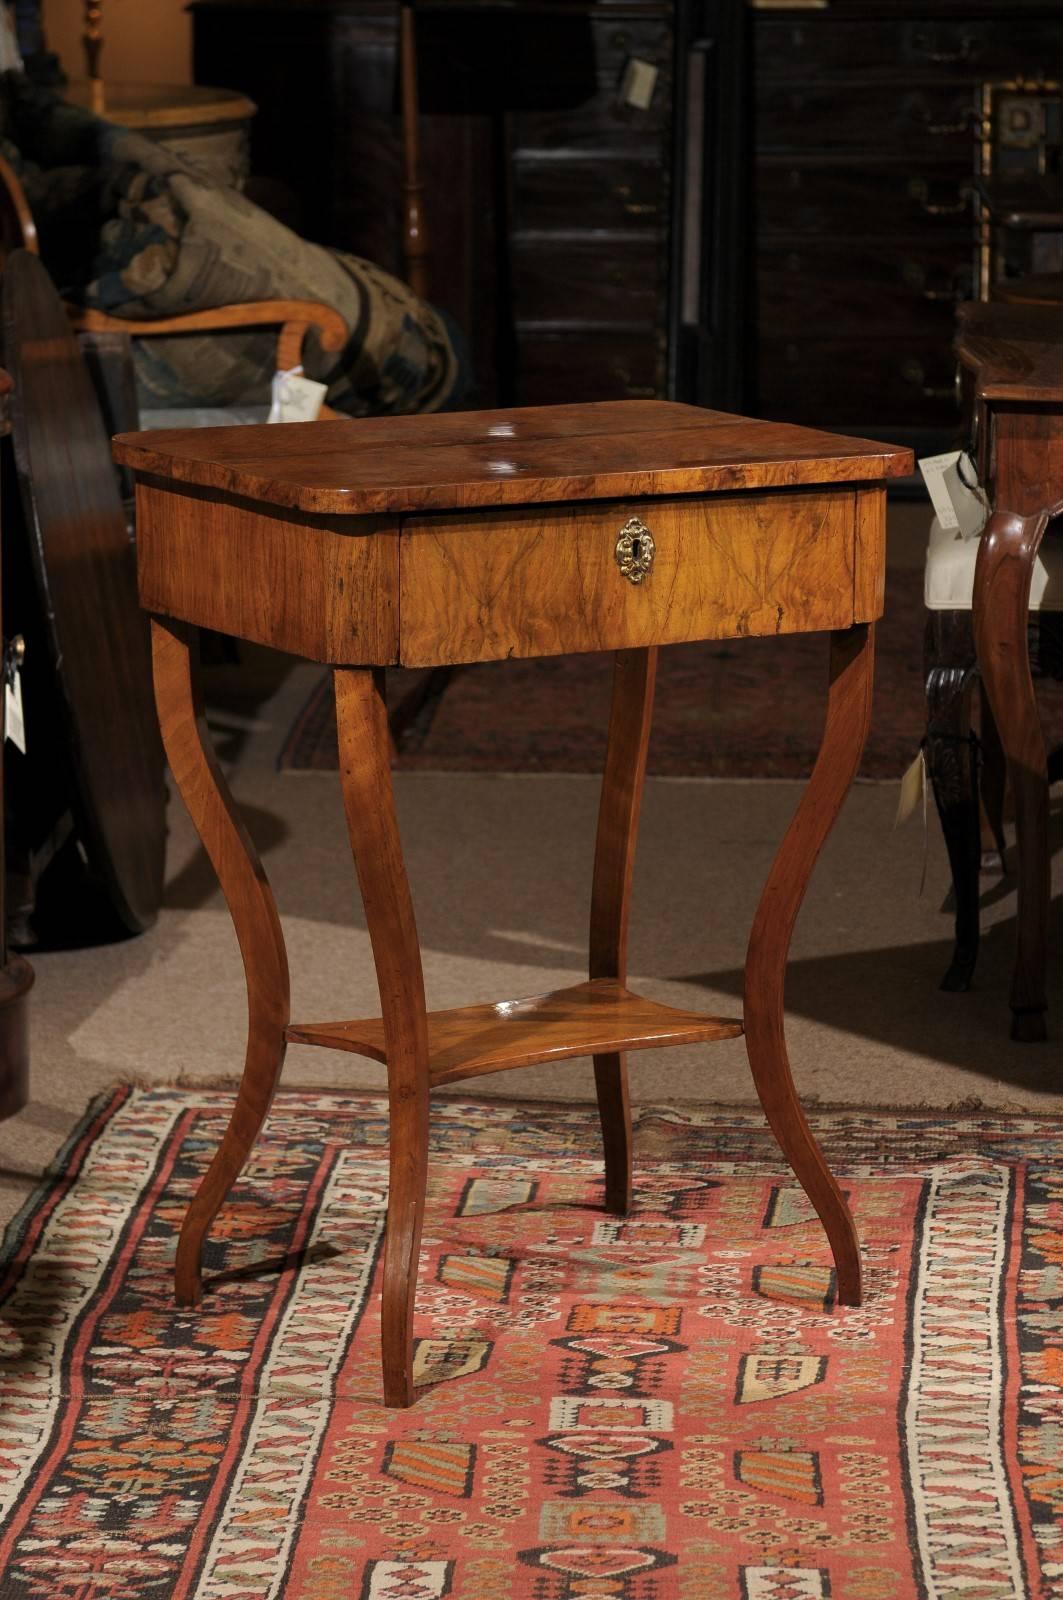 Early 19th century Italian walnut table with saber leg and lower shelf.

